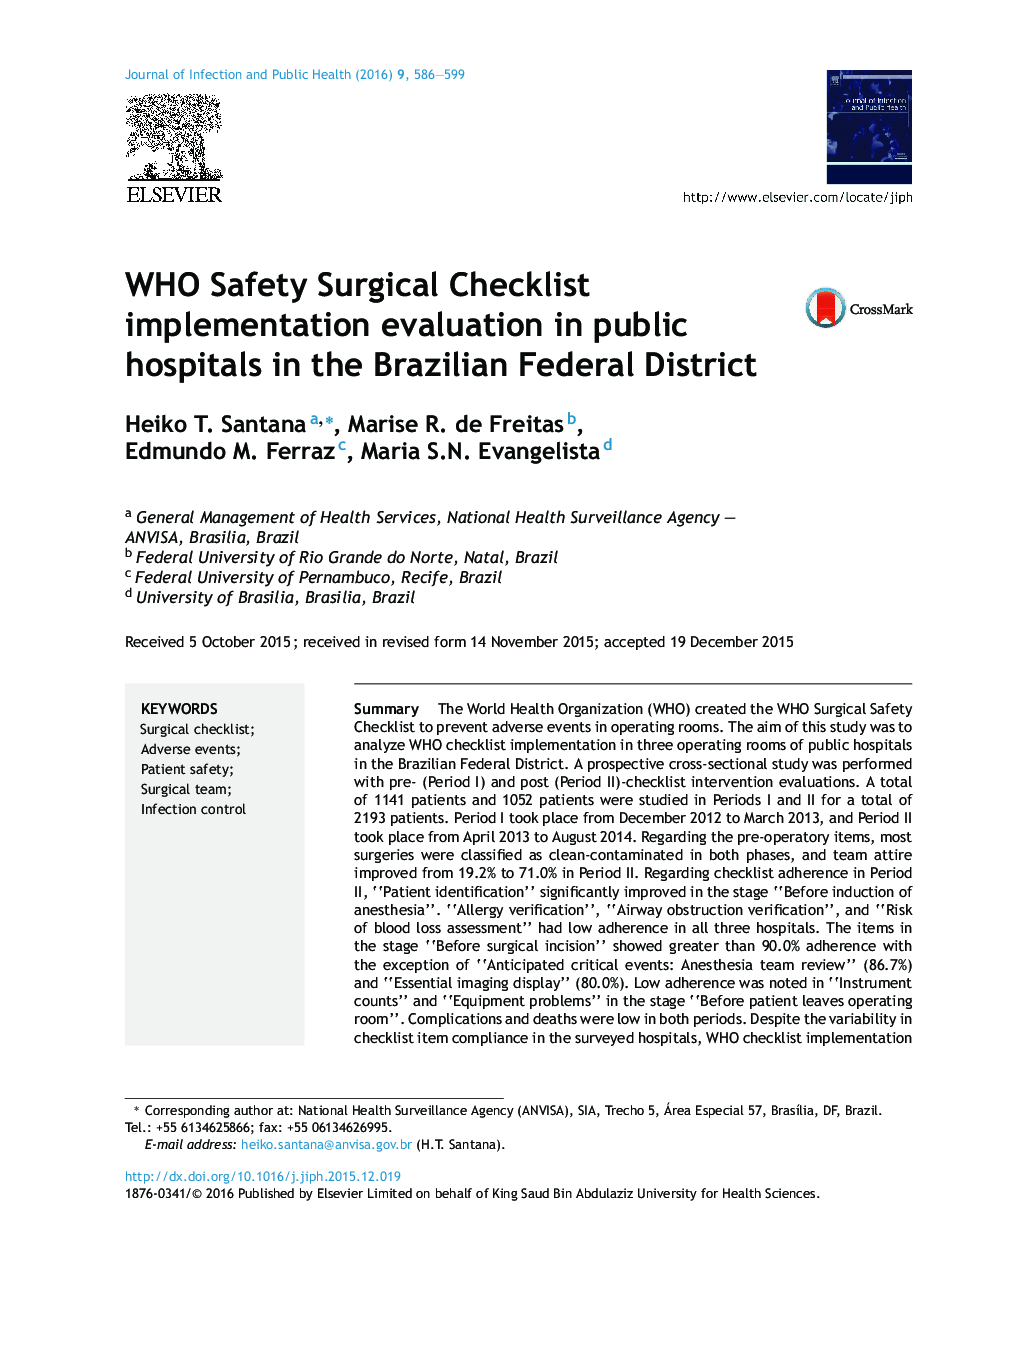 WHO Safety Surgical Checklist implementation evaluation in public hospitals in the Brazilian Federal District